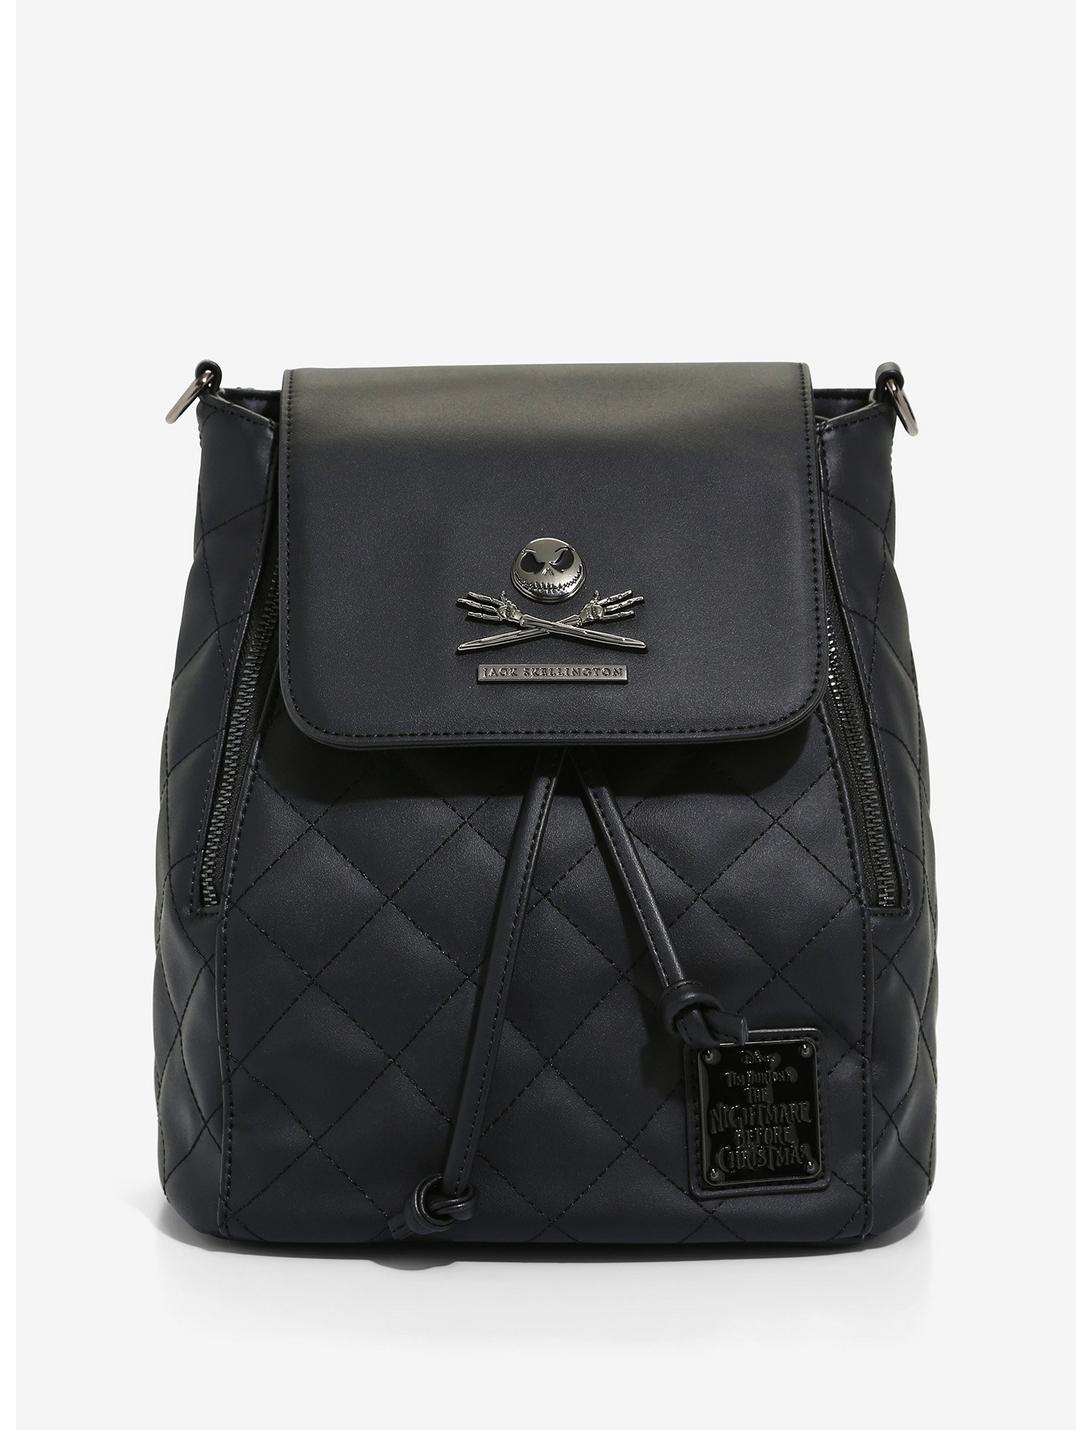 DISNEY LOUNGEFLY NBX MINI SAC A DOS QUILTED EXCLU